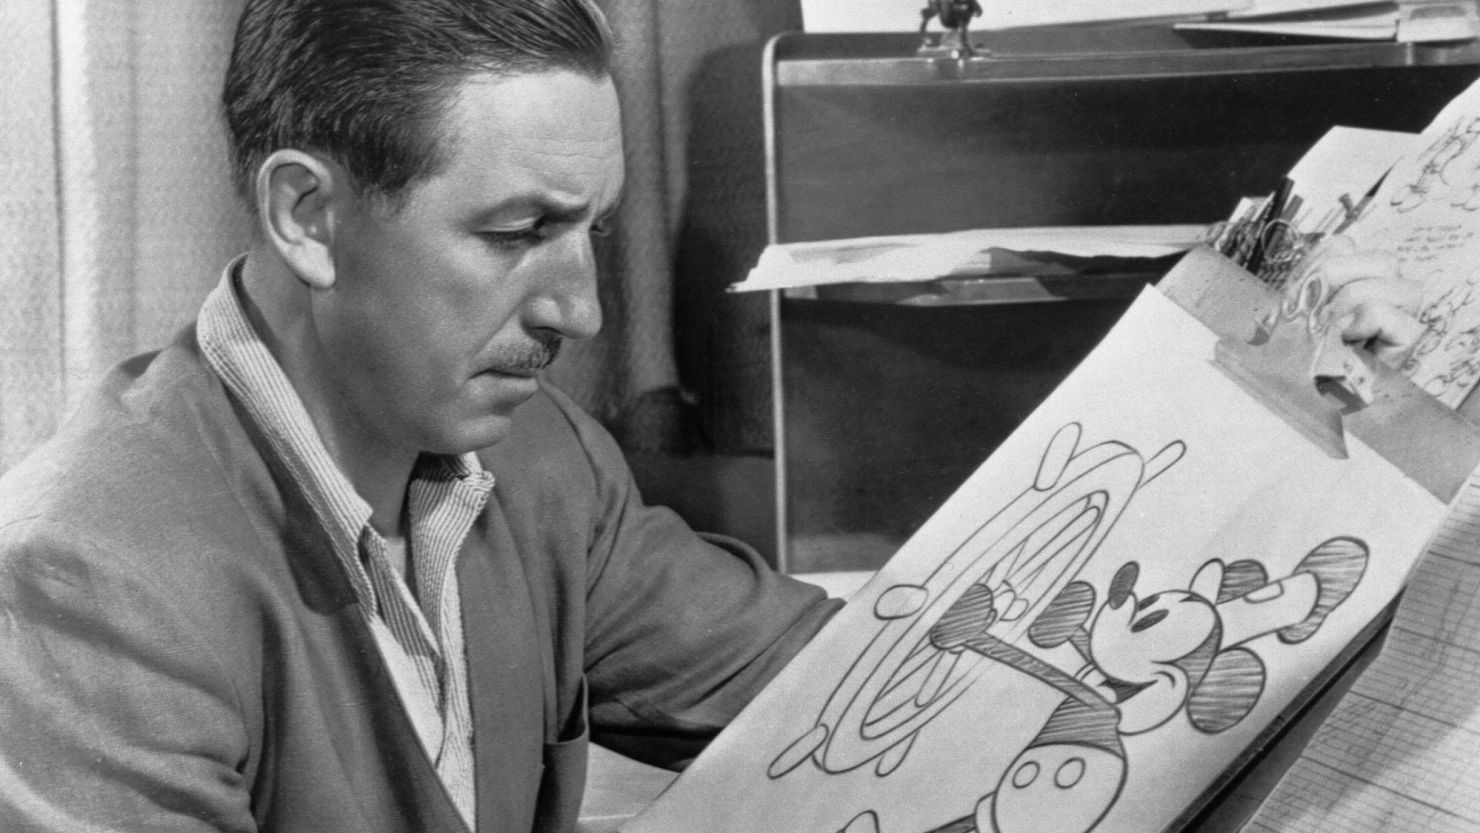 Earliest version of Mickey Mouse joins other iconic characters to